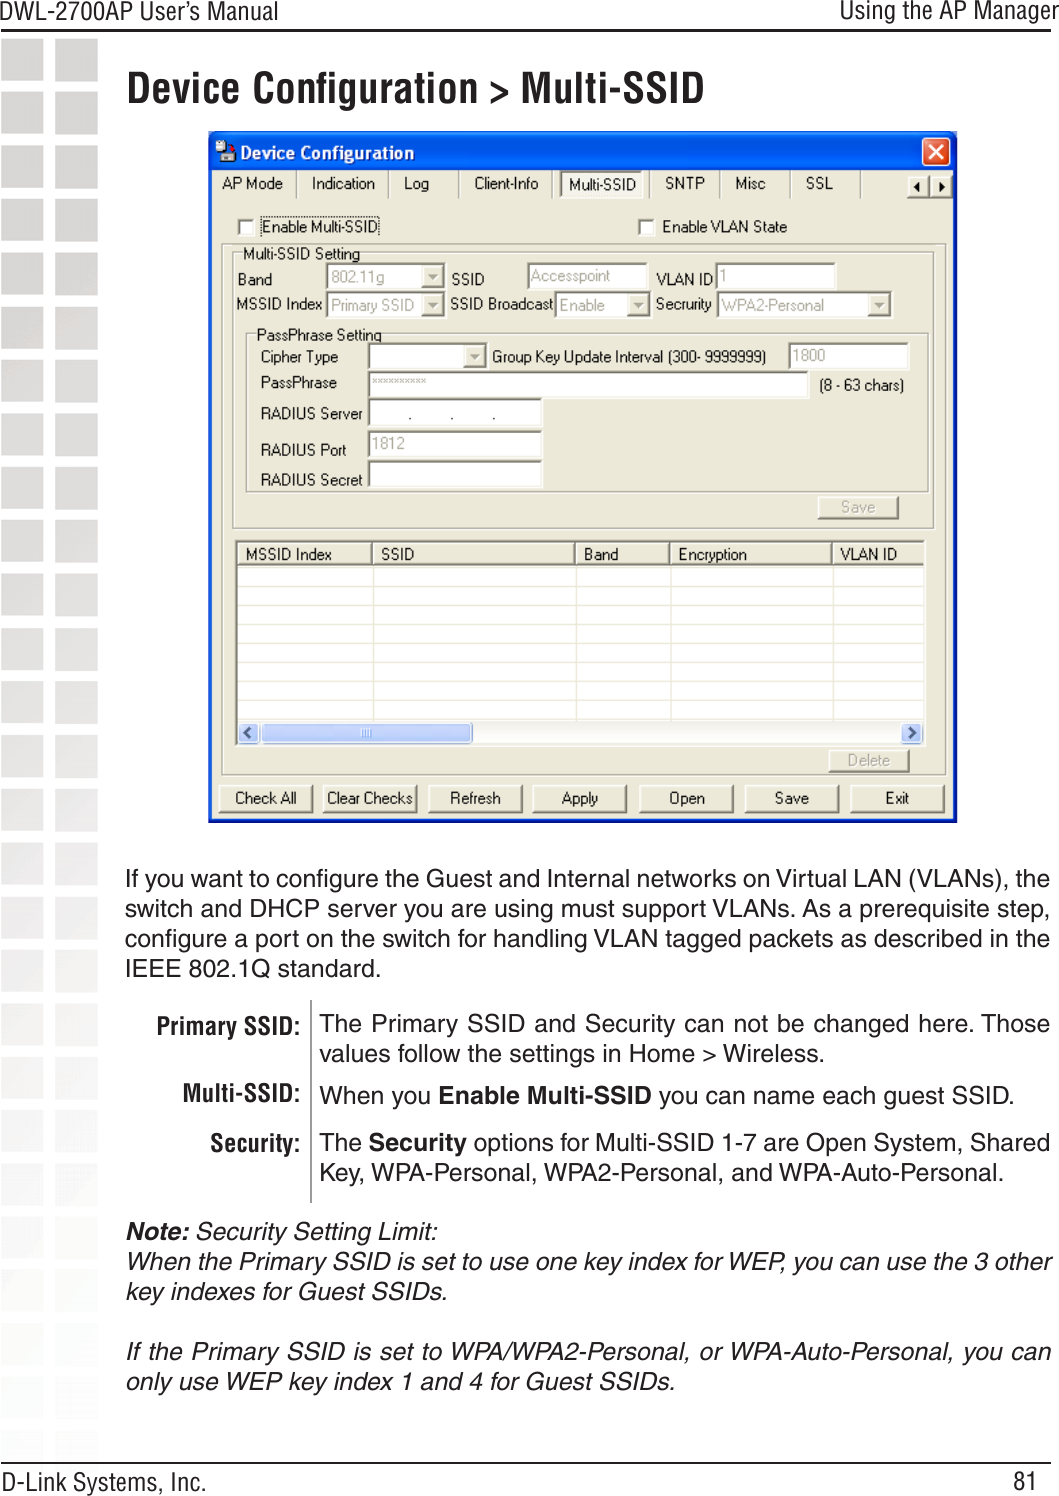 81DWL-2700AP User’s Manual D-Link Systems, Inc.Using the AP ManagerDevice Conﬁguration &gt; Multi-SSIDThe Primary SSID and Security can not be changed here. Those values follow the settings in Home &gt; Wireless.The Security options for Multi-SSID 1-7 are Open System, Shared Key, WPA-Personal, WPA2-Personal, and WPA-Auto-Personal.If you want to conﬁgure the Guest and Internal networks on Virtual LAN (VLANs), the switch and DHCP server you are using must support VLANs. As a prerequisite step, conﬁgure a port on the switch for handling VLAN tagged packets as described in the IEEE 802.1Q standard.  Primary SSID: Multi-SSID: When you Enable Multi-SSID you can name each guest SSID.  Security: Note: Security Setting Limit:When the Primary SSID is set to use one key index for WEP, you can use the 3 other key indexes for Guest SSIDs.If the Primary SSID is set to WPA/WPA2-Personal, or WPA-Auto-Personal, you can only use WEP key index 1 and 4 for Guest SSIDs.